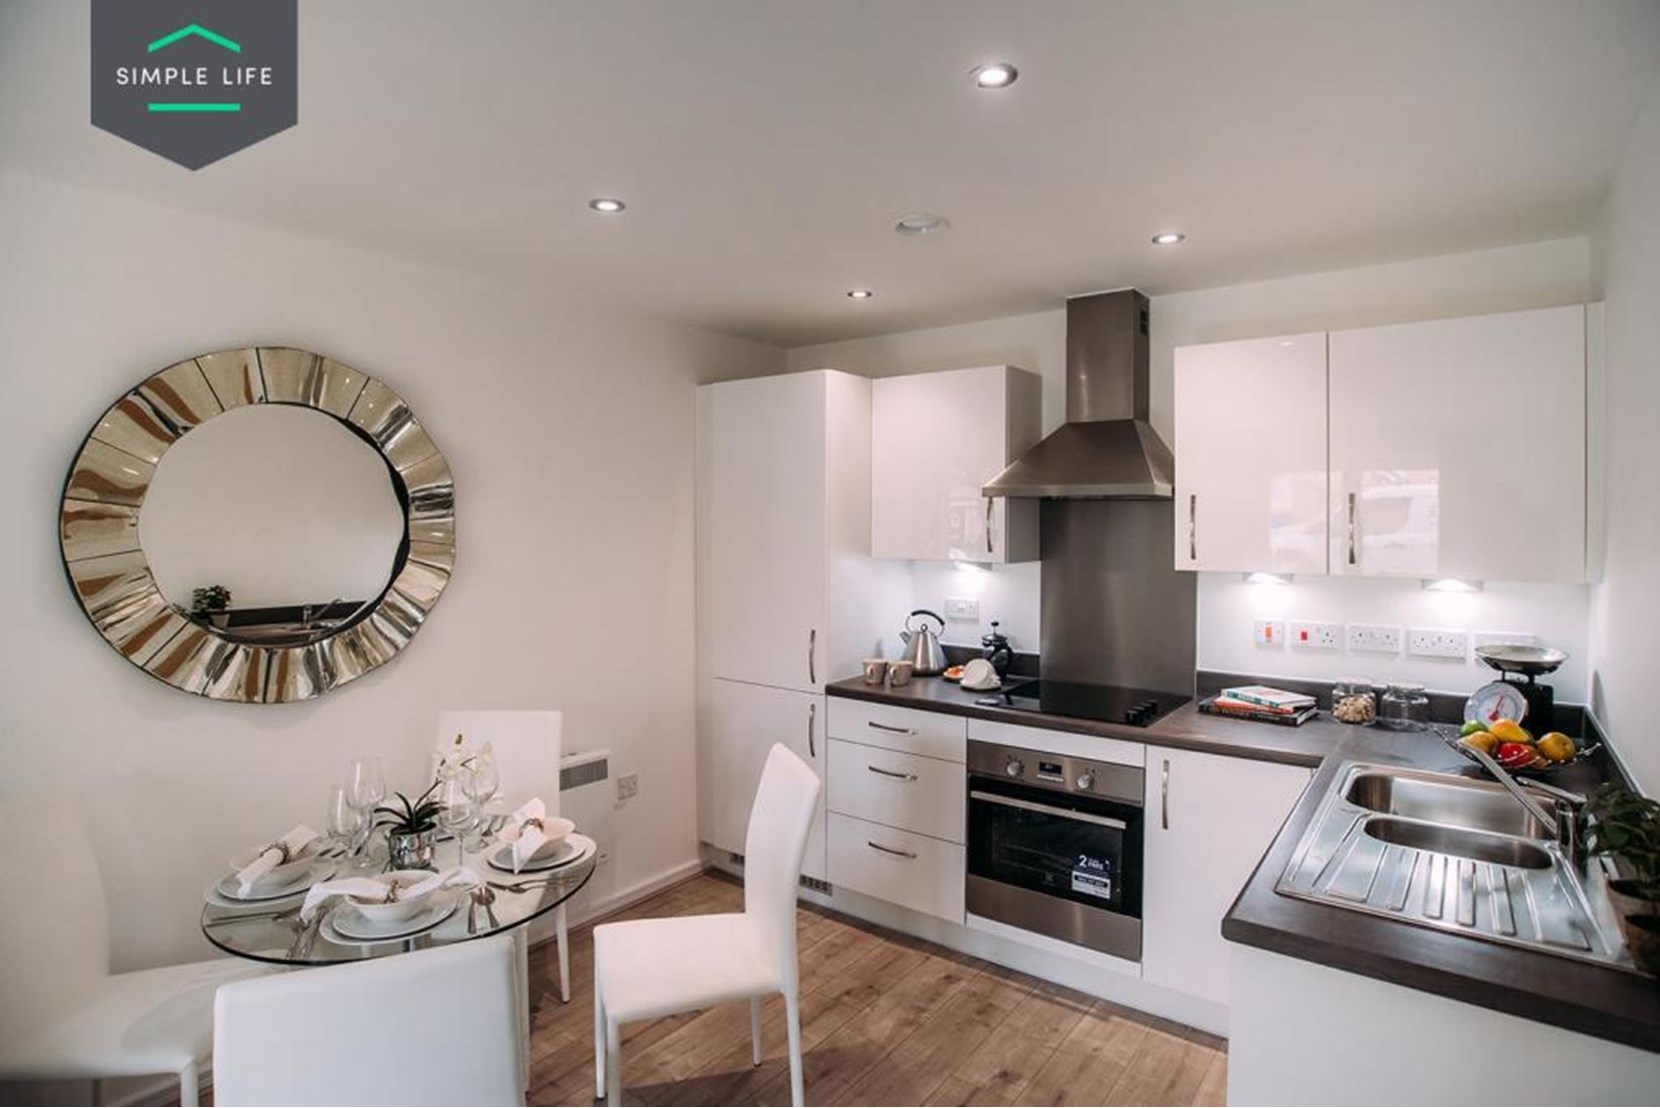 Apartments to Rent by Simple Life, The Alder, 2 bedroom apartment, kitchen dining area